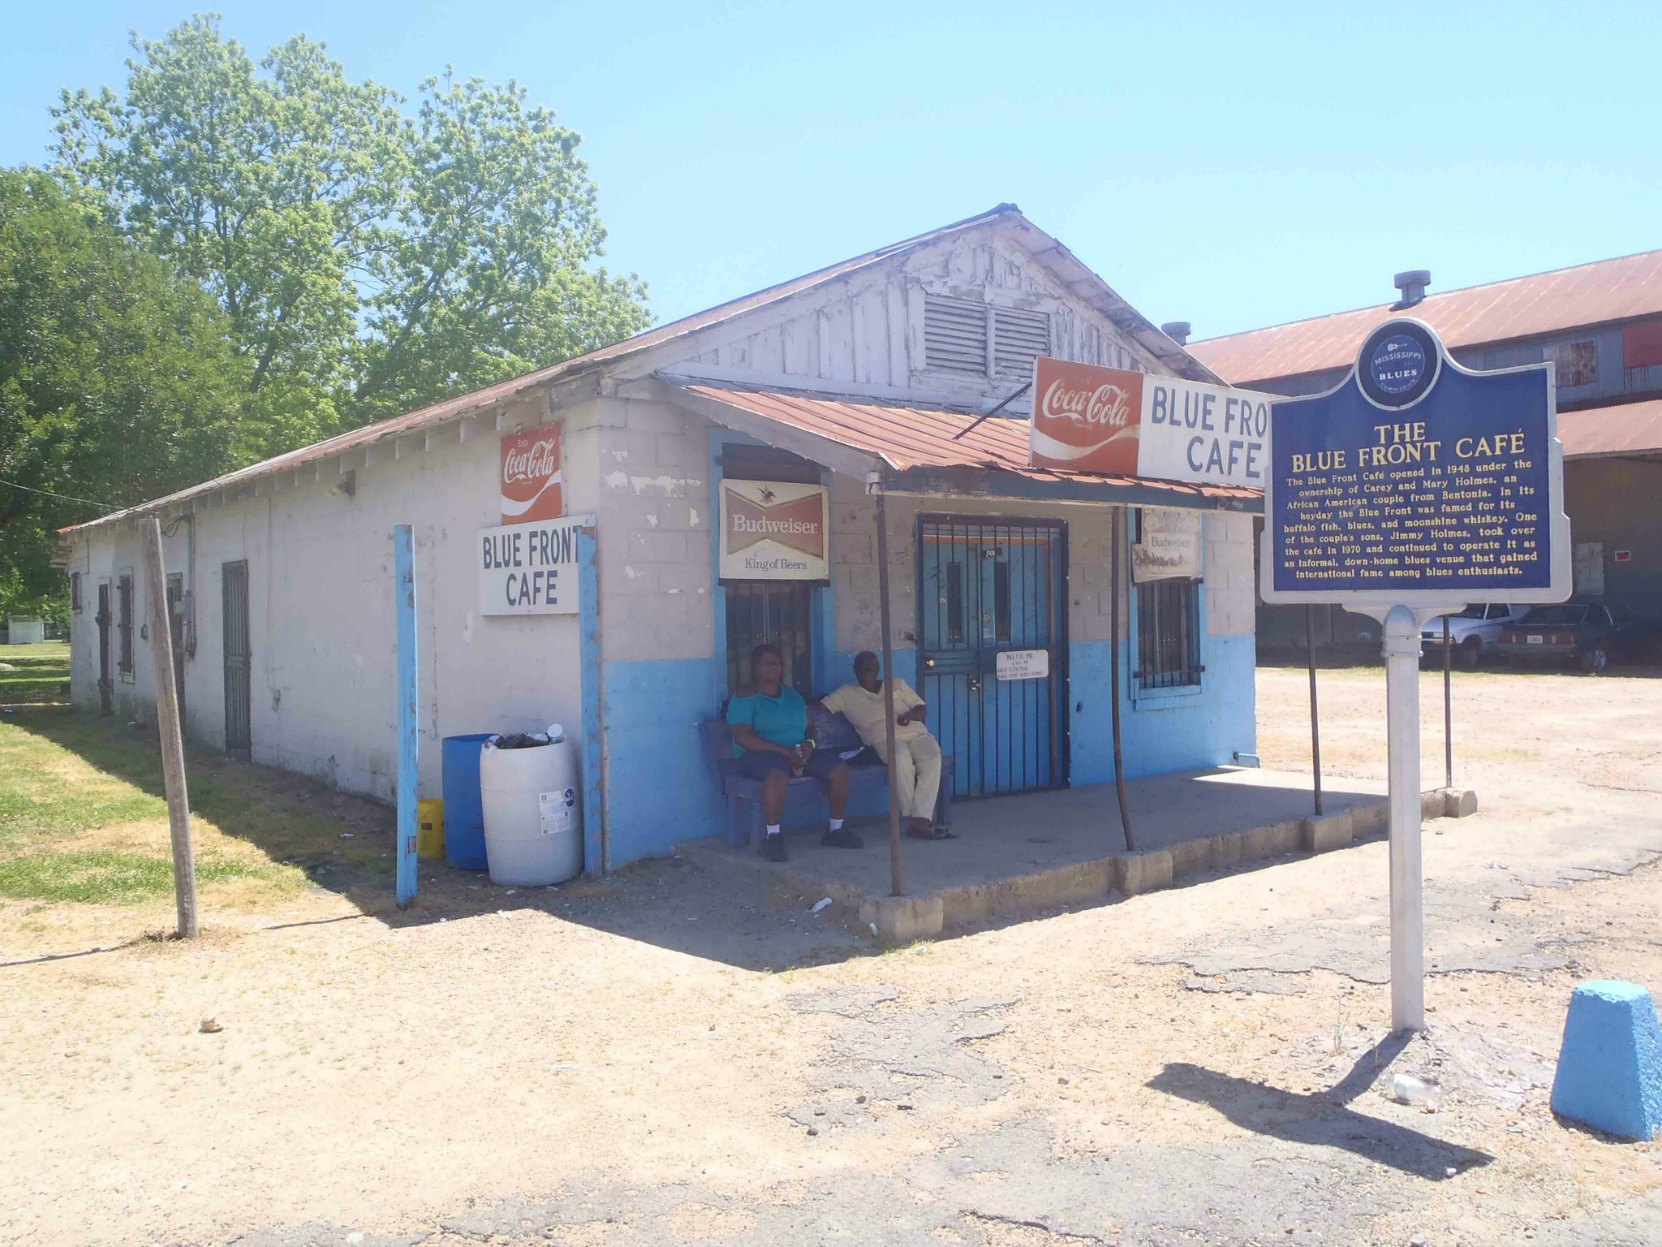 The Blue Front Cafe in Bentonia, Yazoo County, Mississippi. Operated by Jimmy Holmes.